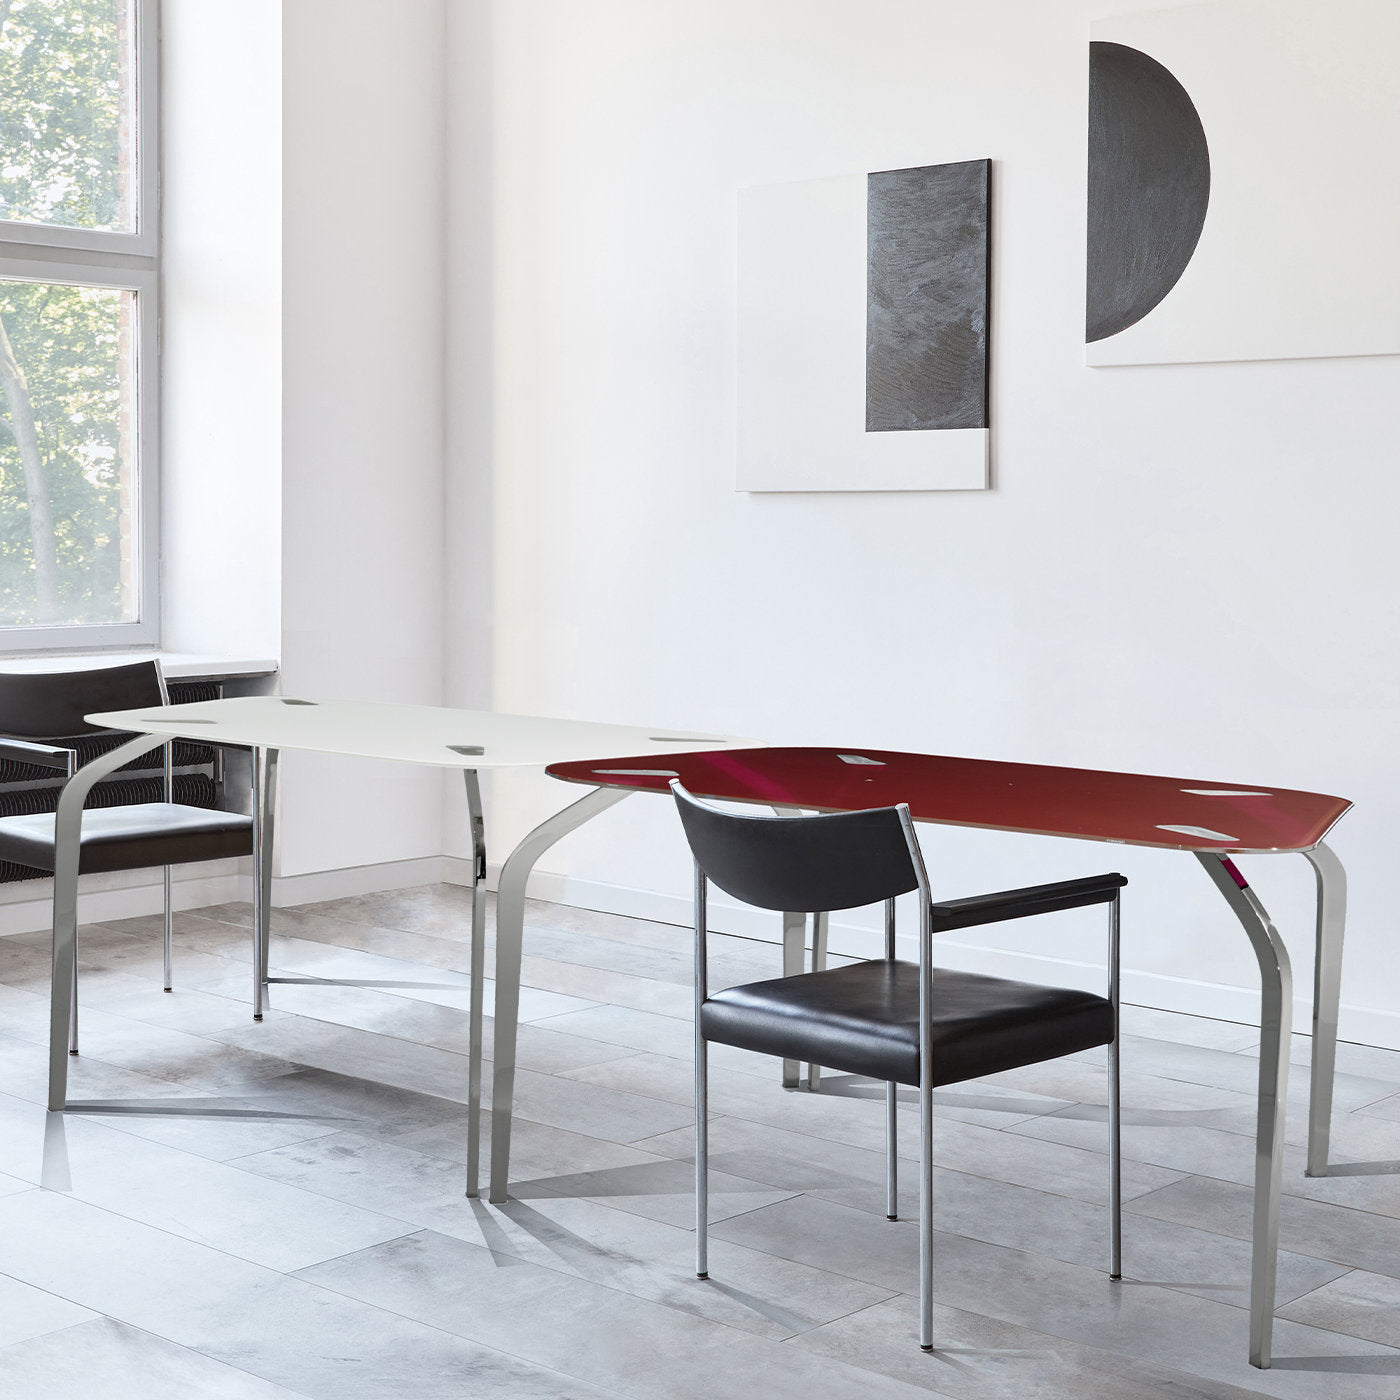 Mira Red and White Dining Table by Mac Stopà - Alternative view 1